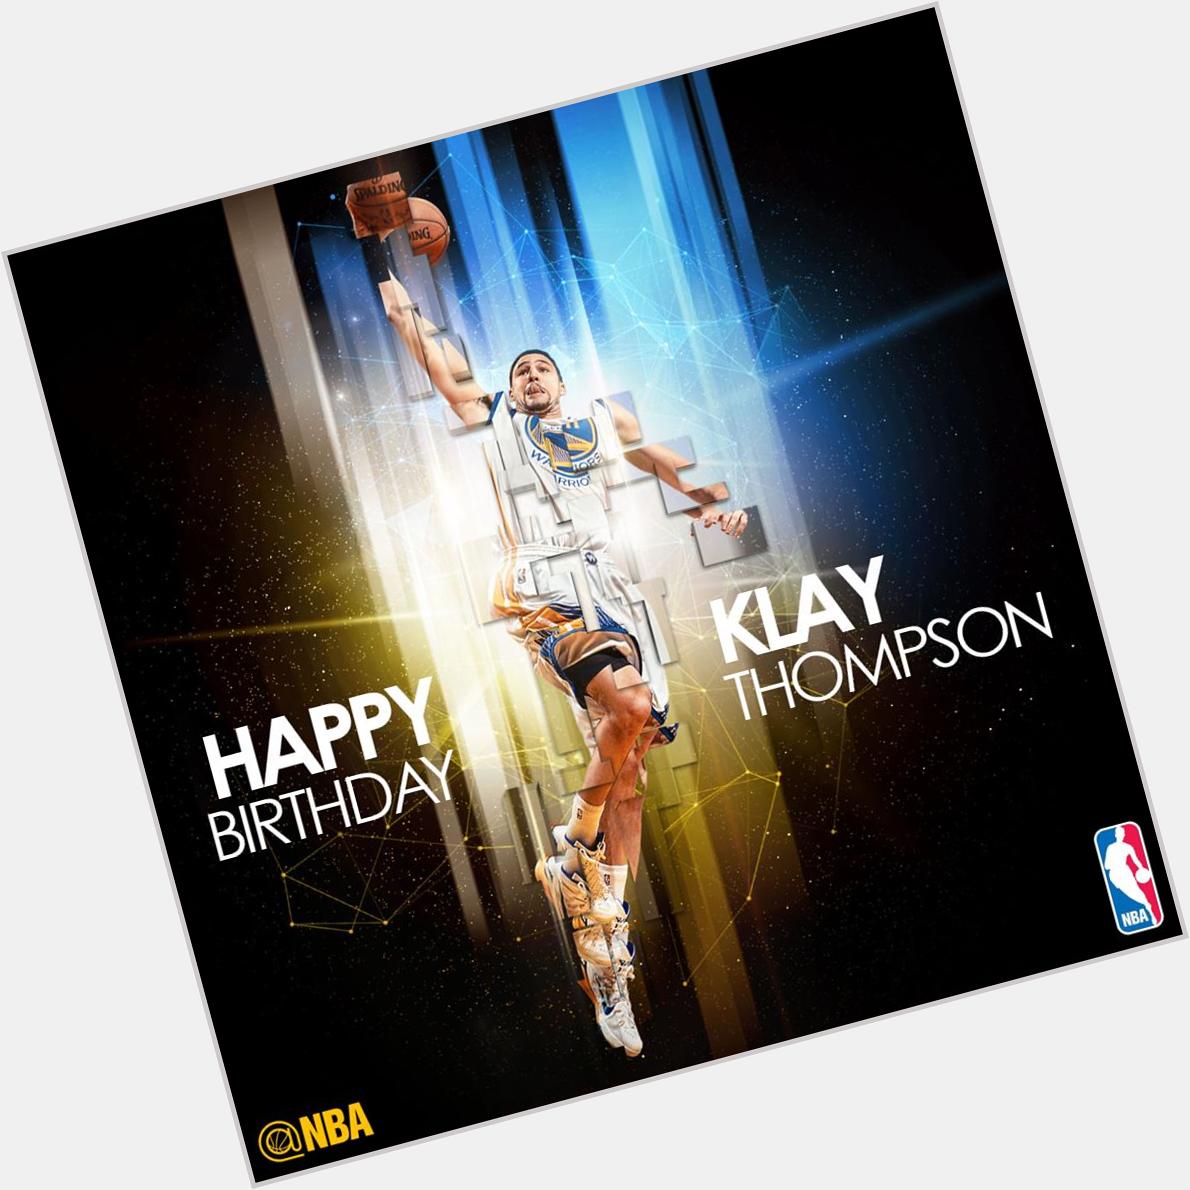 Join us in wishing Klay Thompson of the Golden State Warriors a HAPPY 25th BIRTHDAY! 